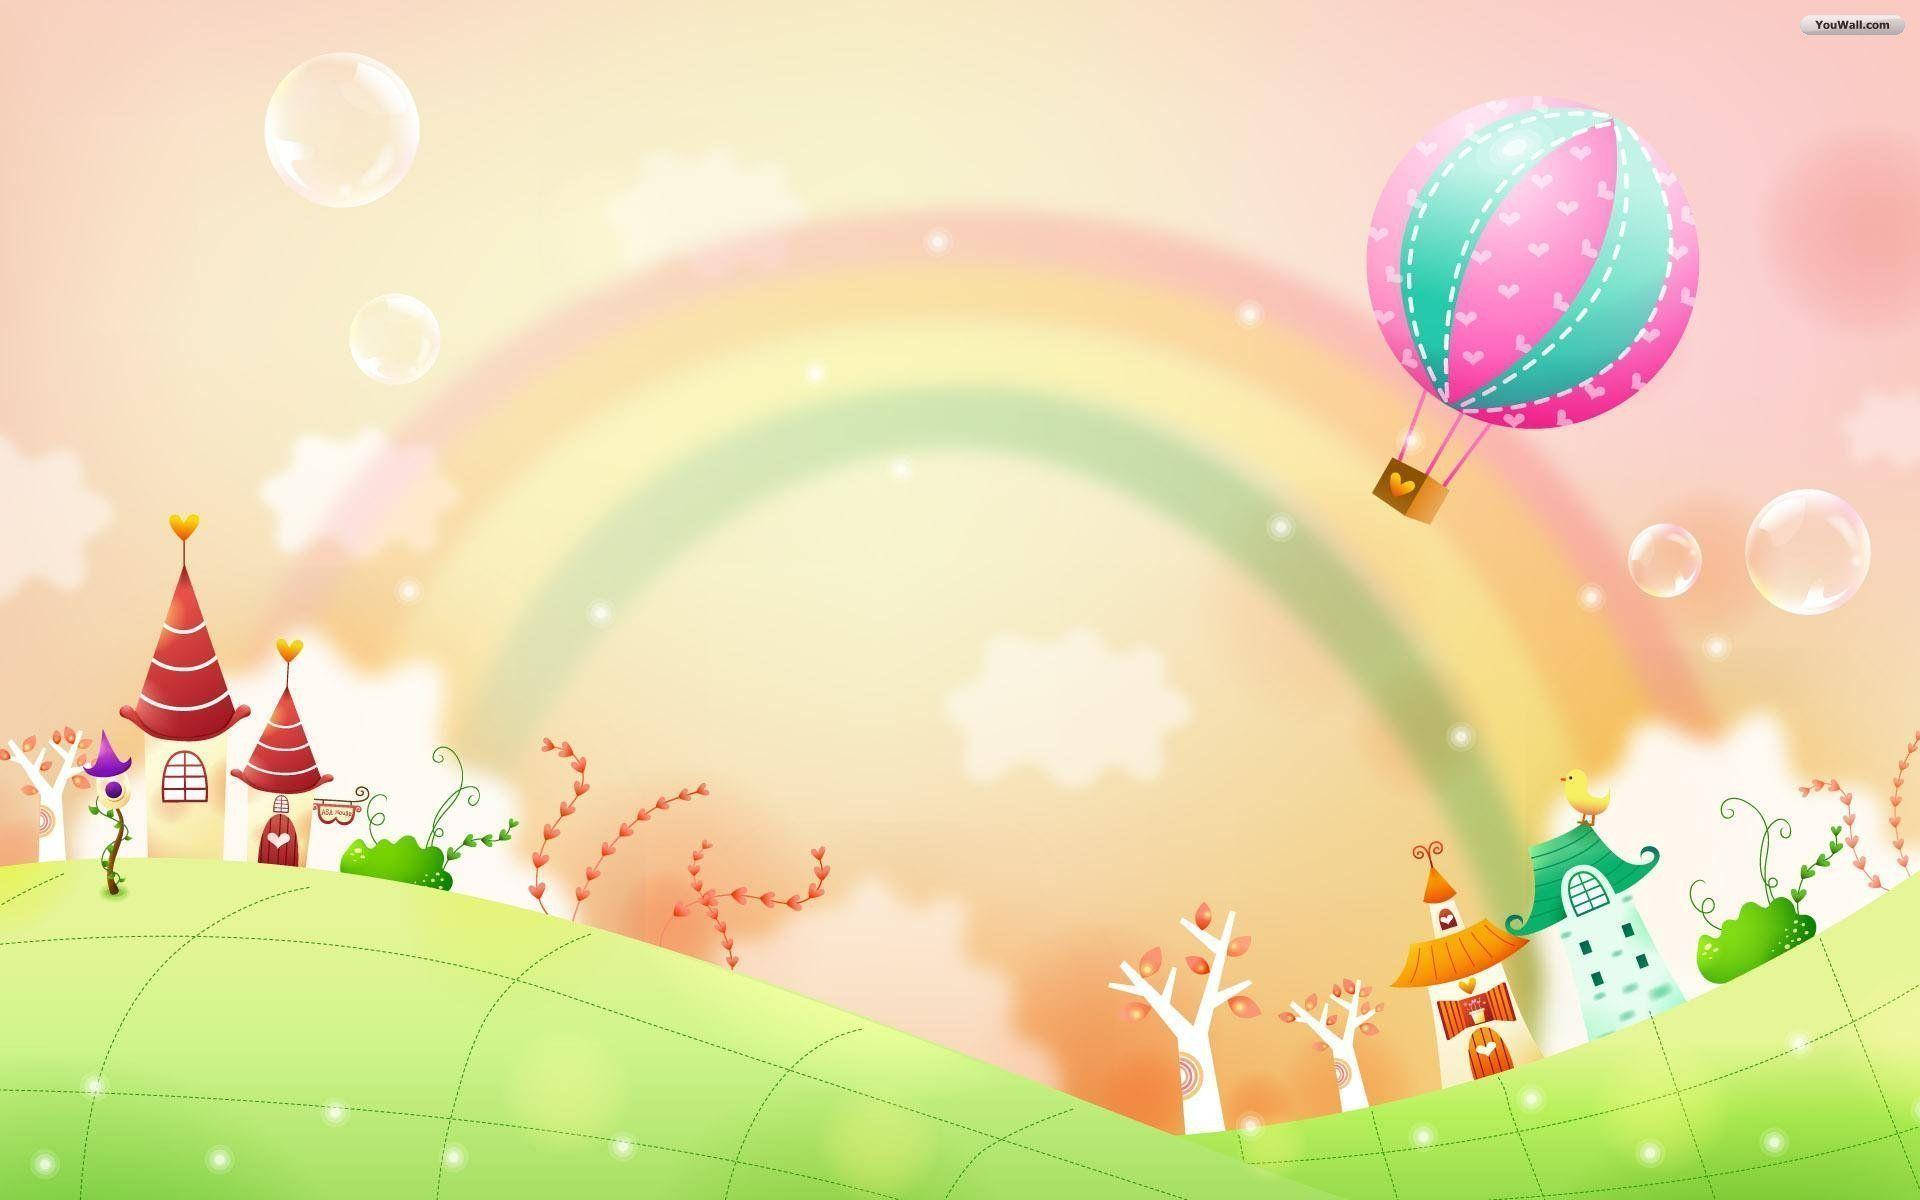 Rainbow 1920X1200 Wallpaper and Background Image